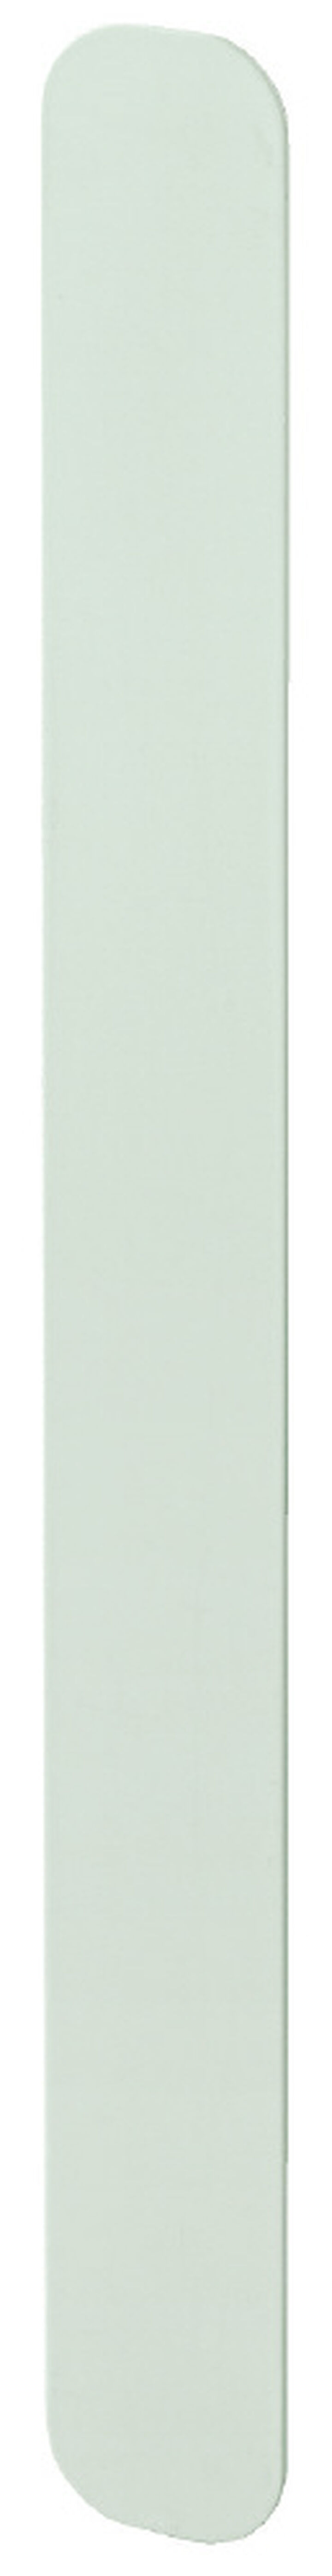 MAGNET for the wall Auxiliary board Bar Type Green,Pastel green, medium